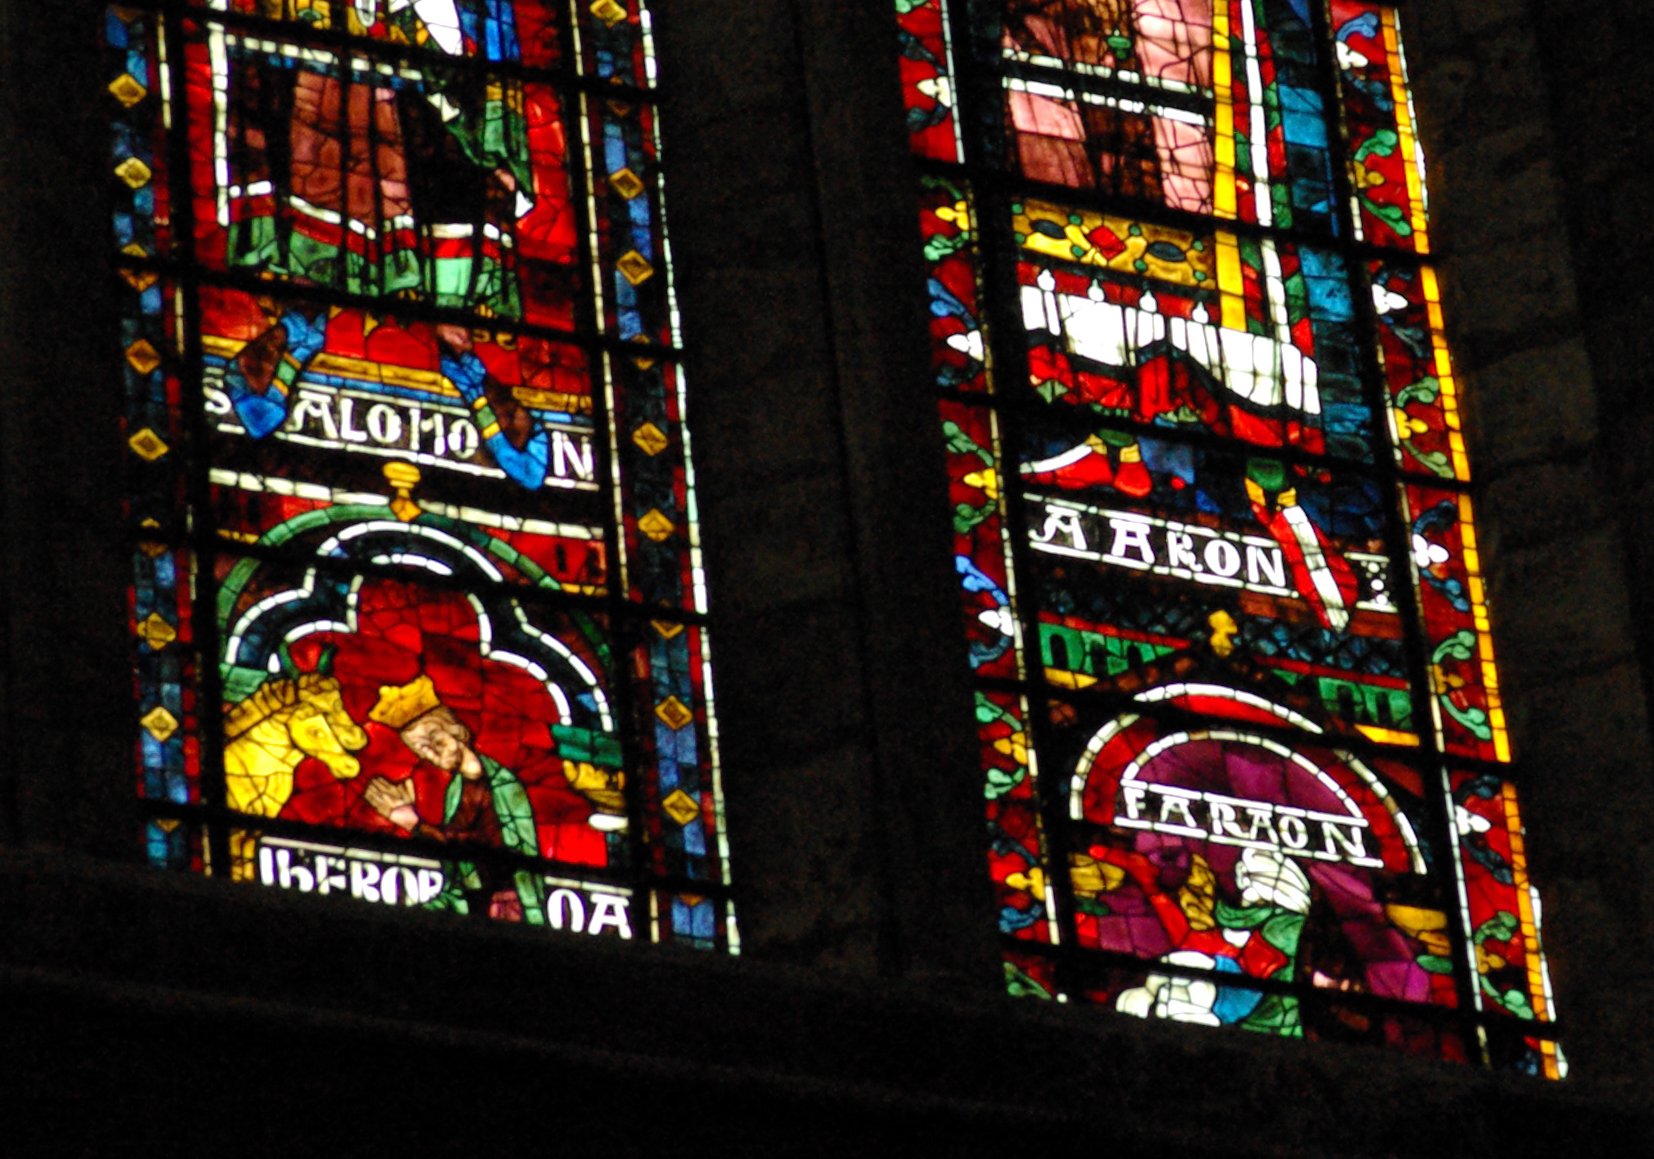 Stain glass of the cathedral of Chartres